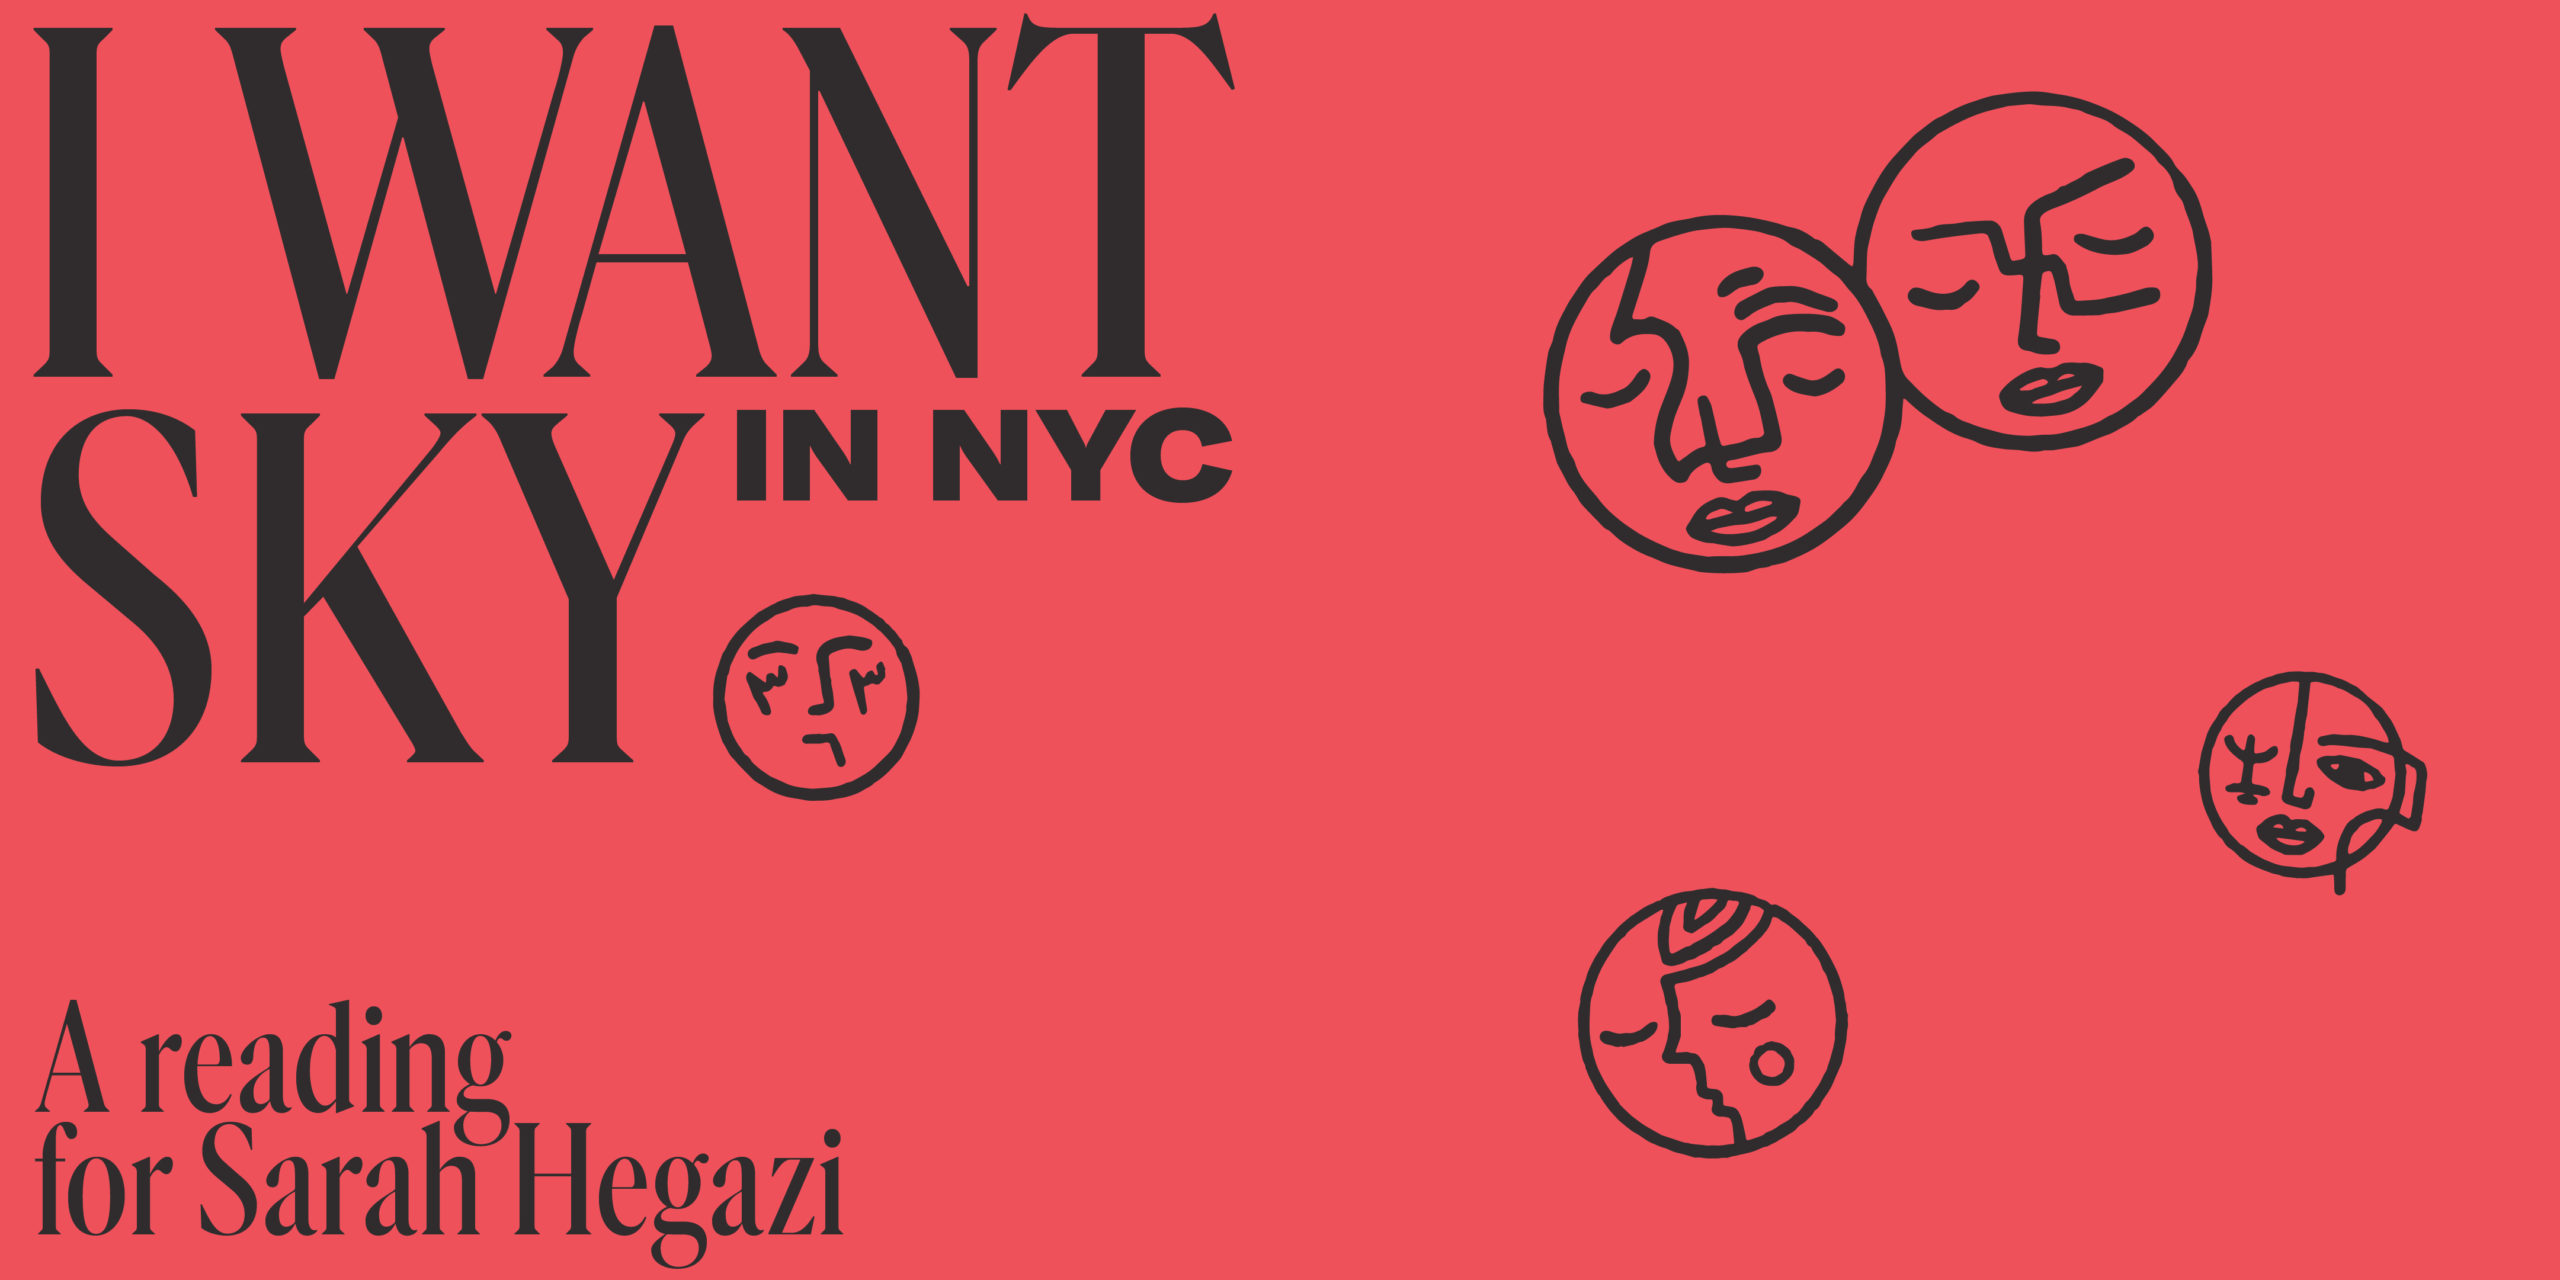 [LIVE] I WANT SKY in New York: A reading for Sarah Hegazi